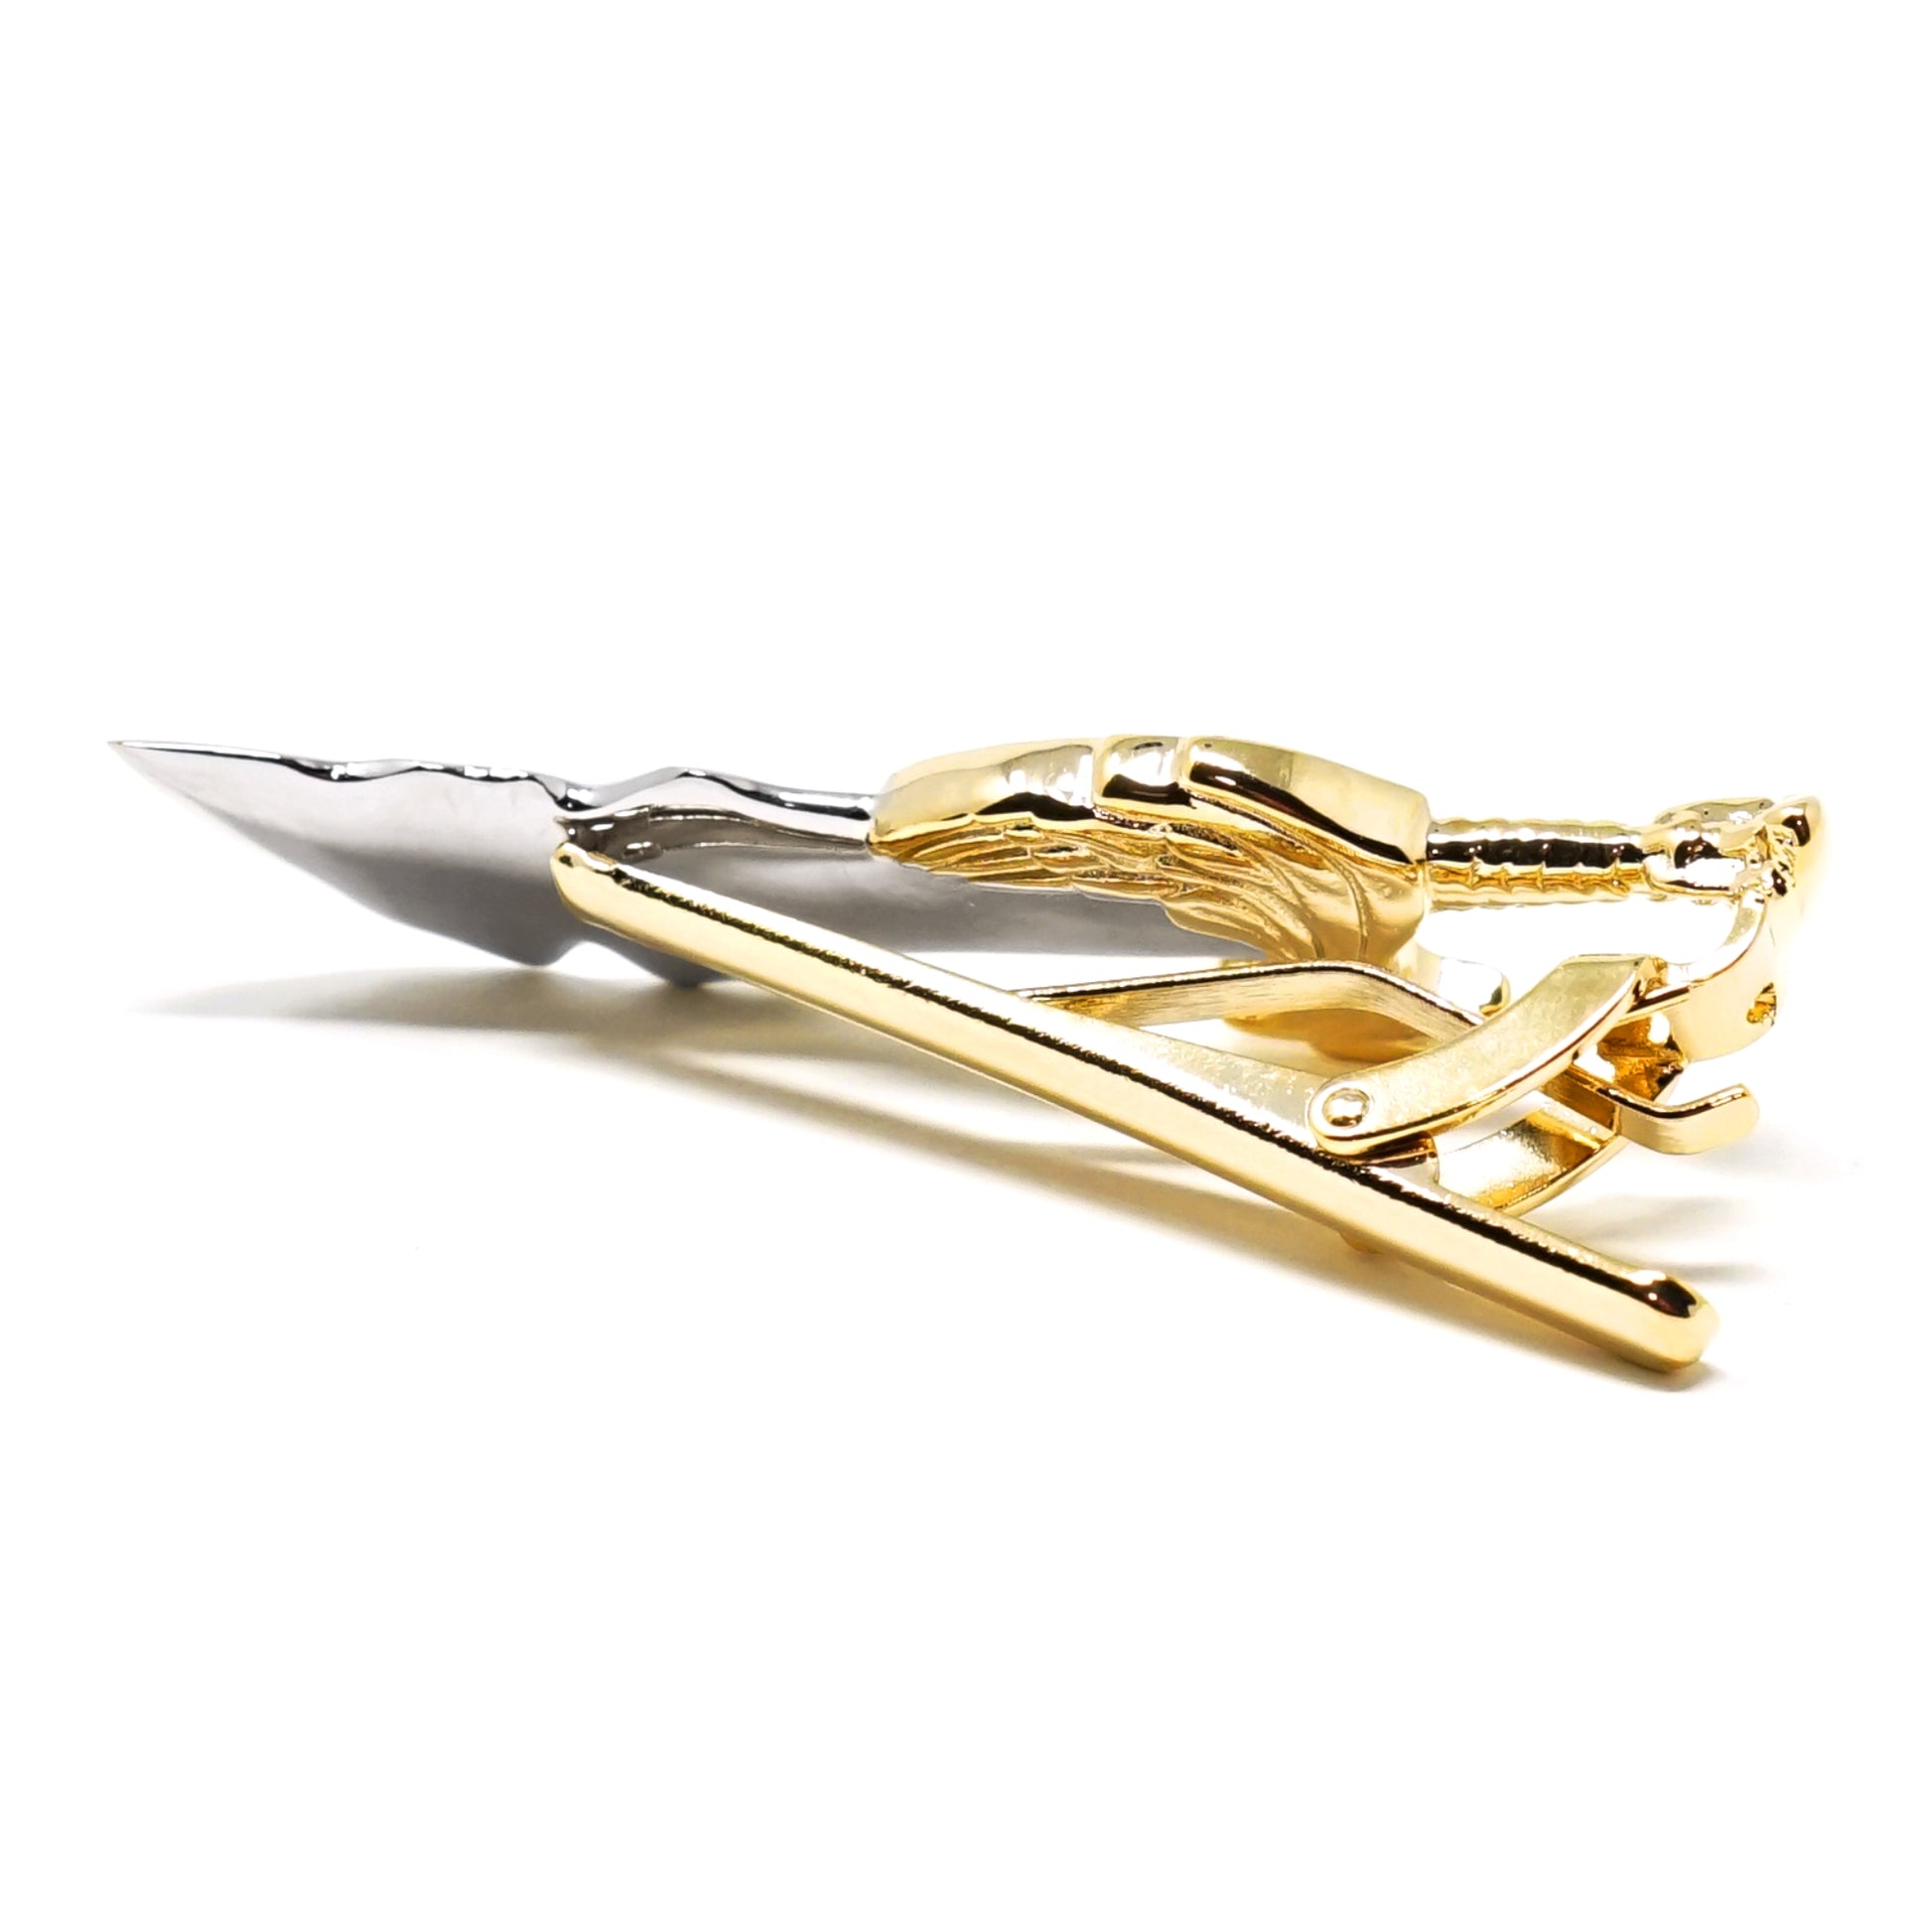 The Blade Of Ares (Tie Clip)